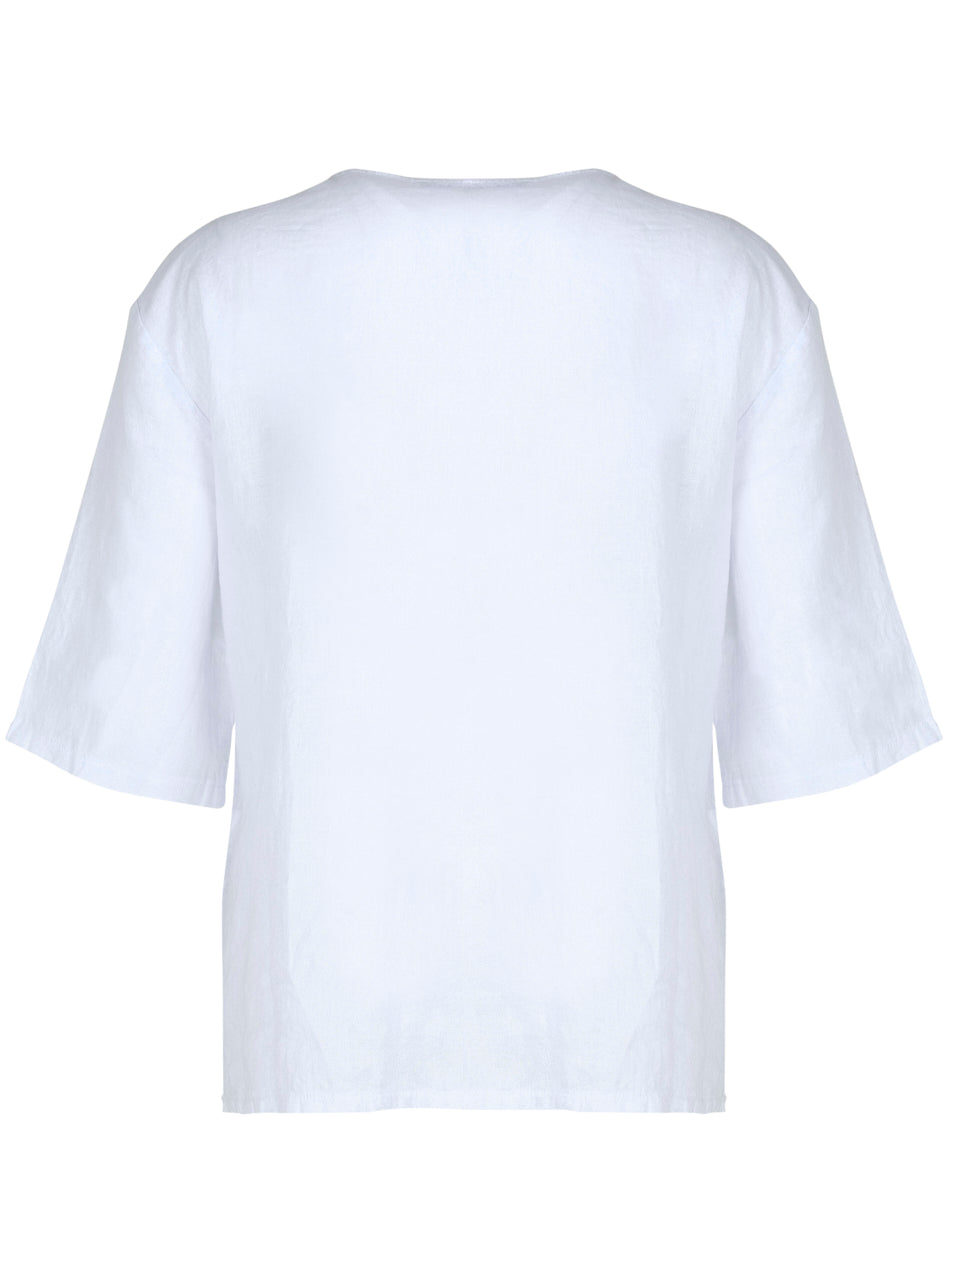 EverSassy Spring 2023 wone's casual loose linen top with pocket and snap details - white back